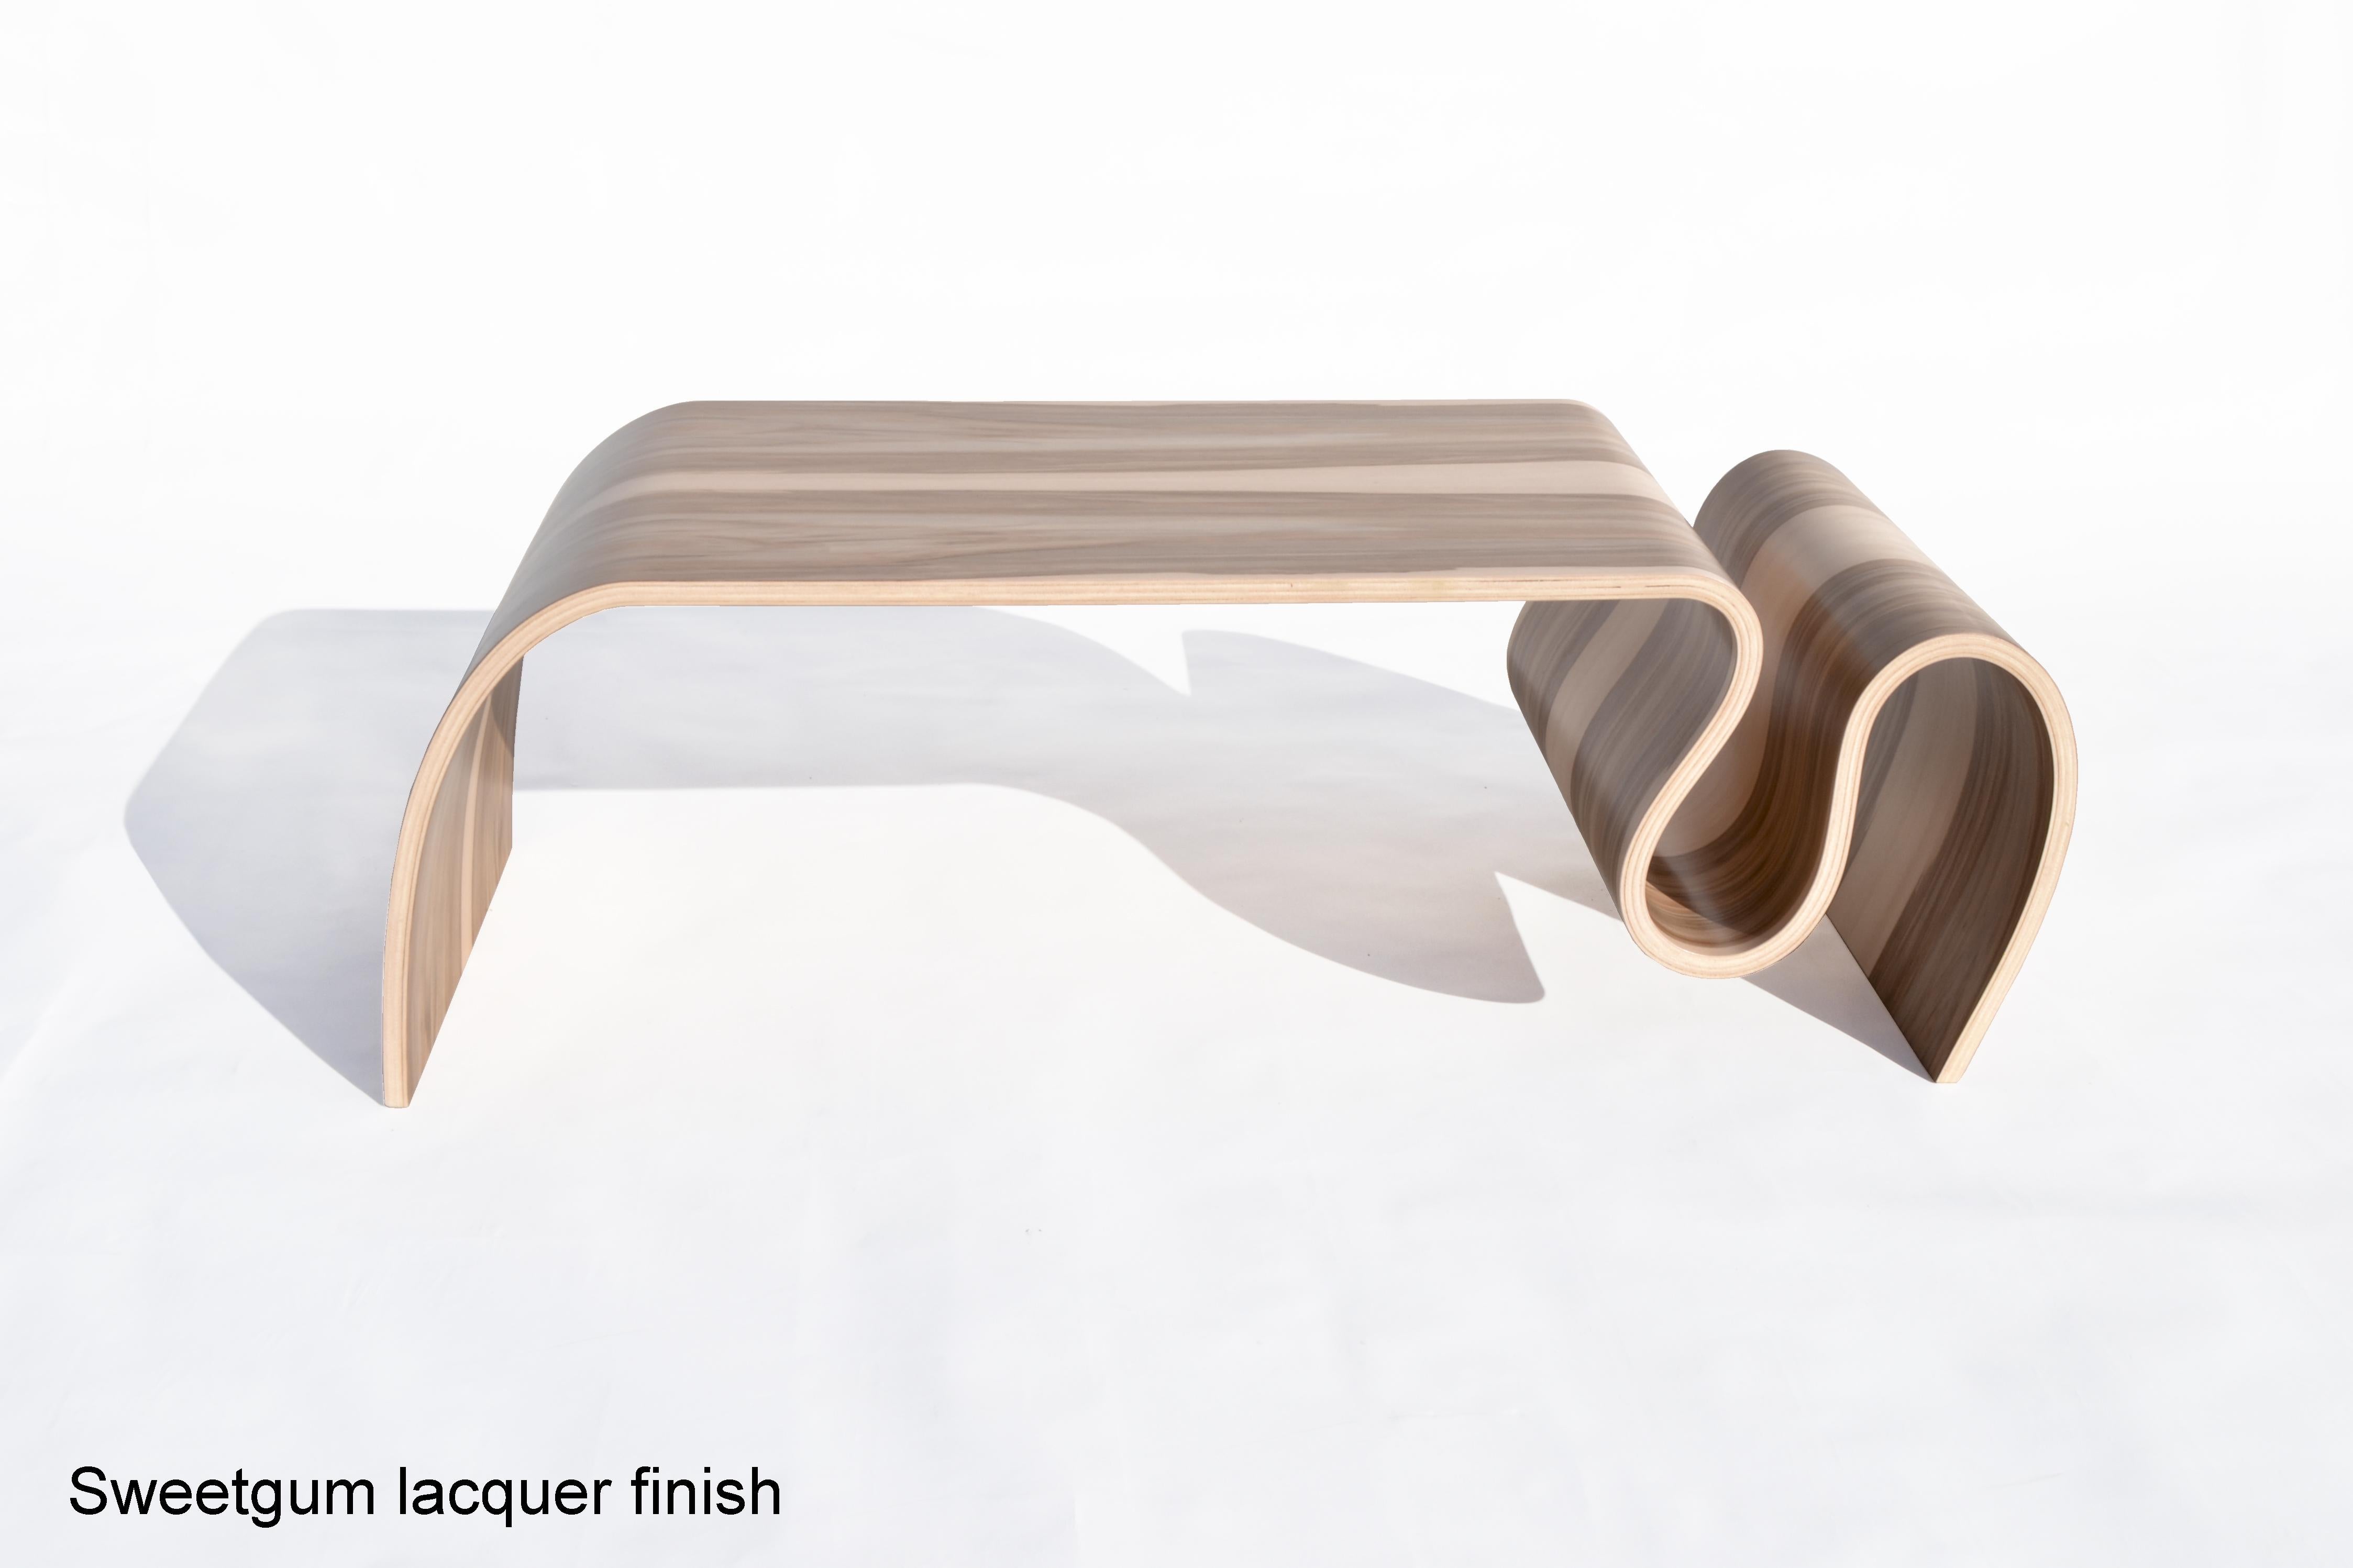 The design of this table is very unique and unusual, it would be a great touch of modernity in your home design.
This coffee table is made with laminated bent plywood, Sweet Gum veneer.
Overall e: 16